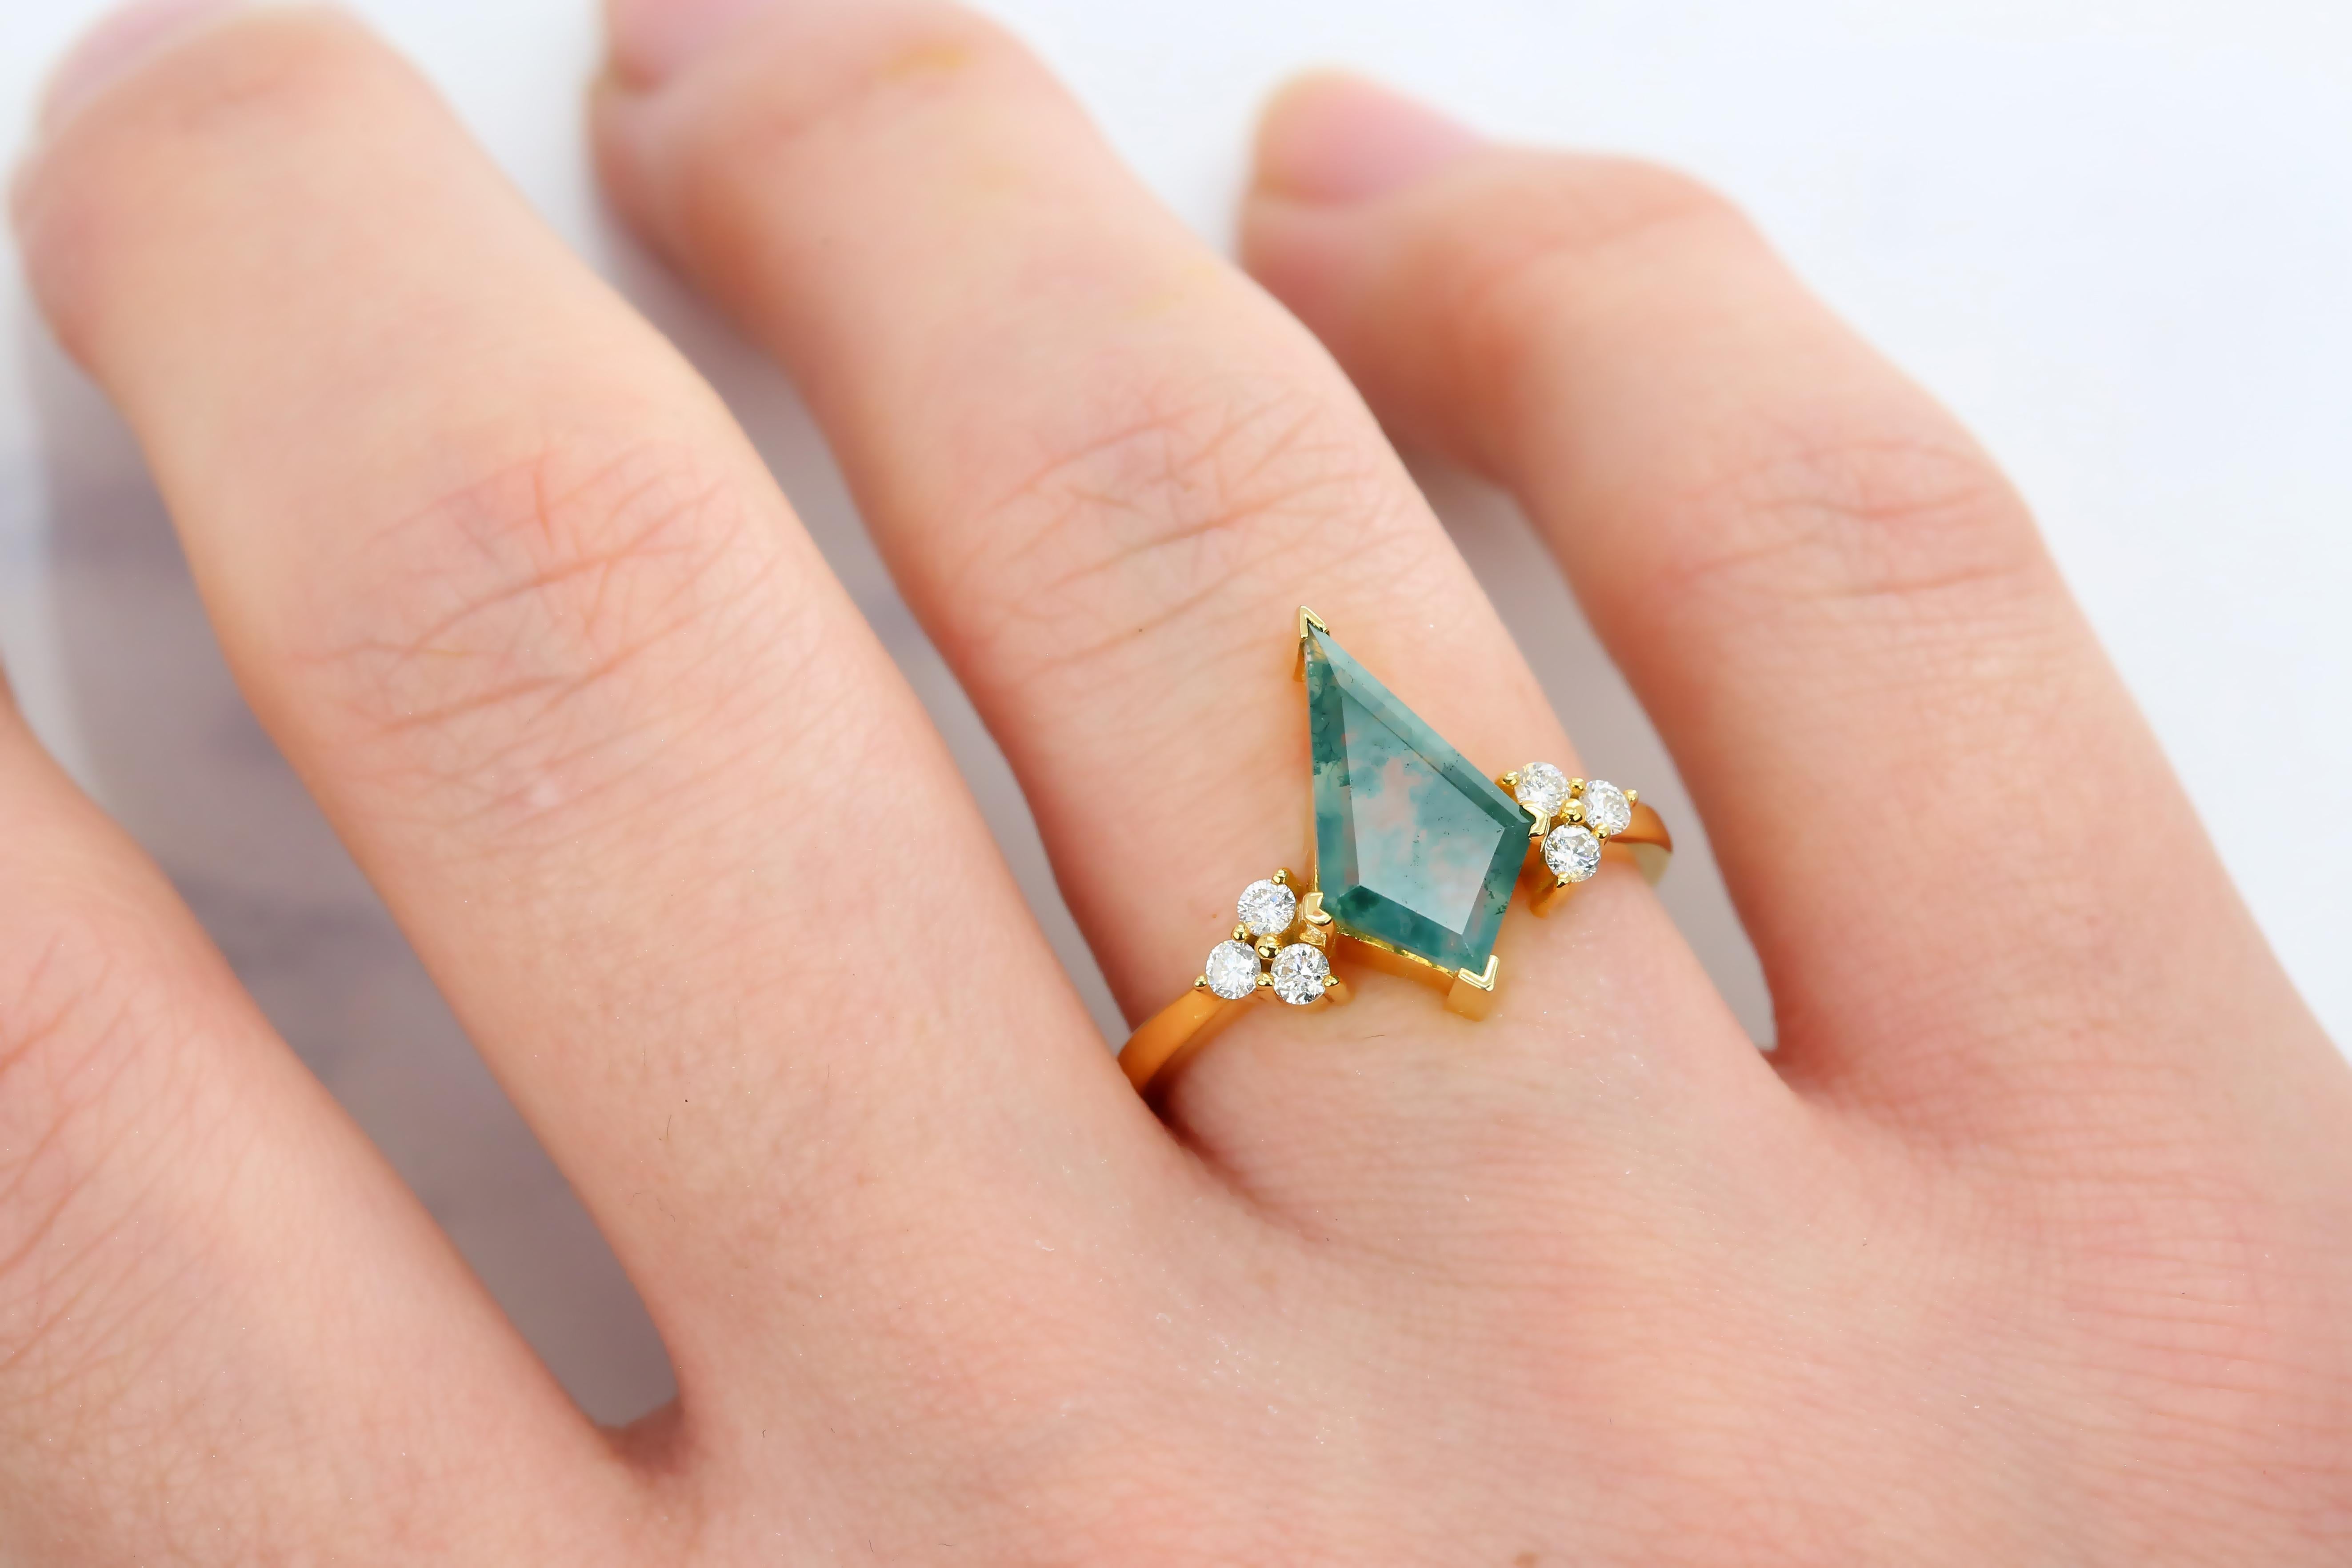 moss agate ring meaning